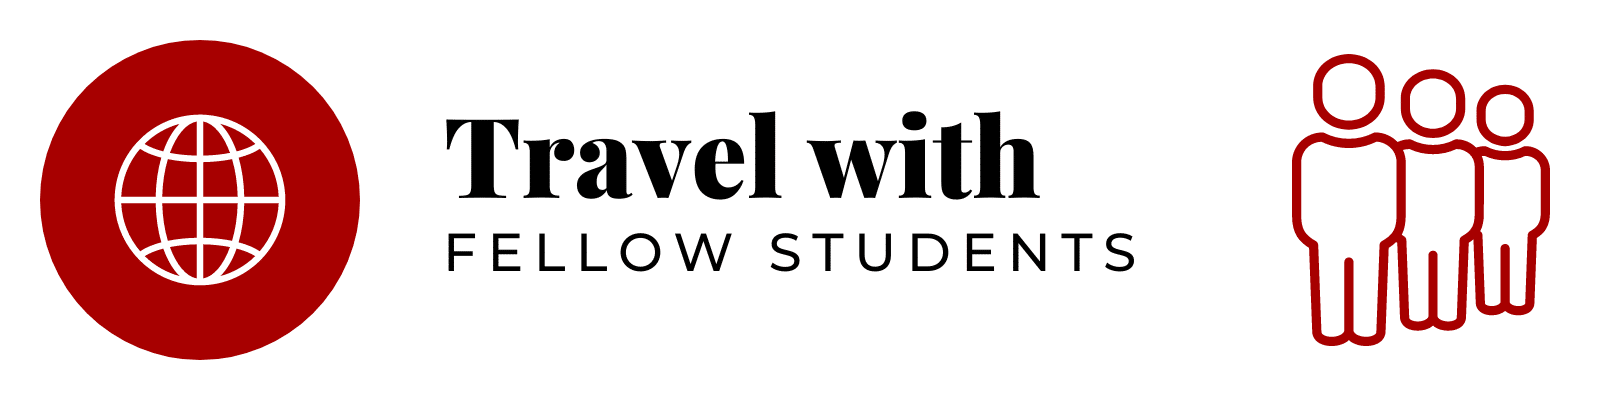 Travel with Fellow Students